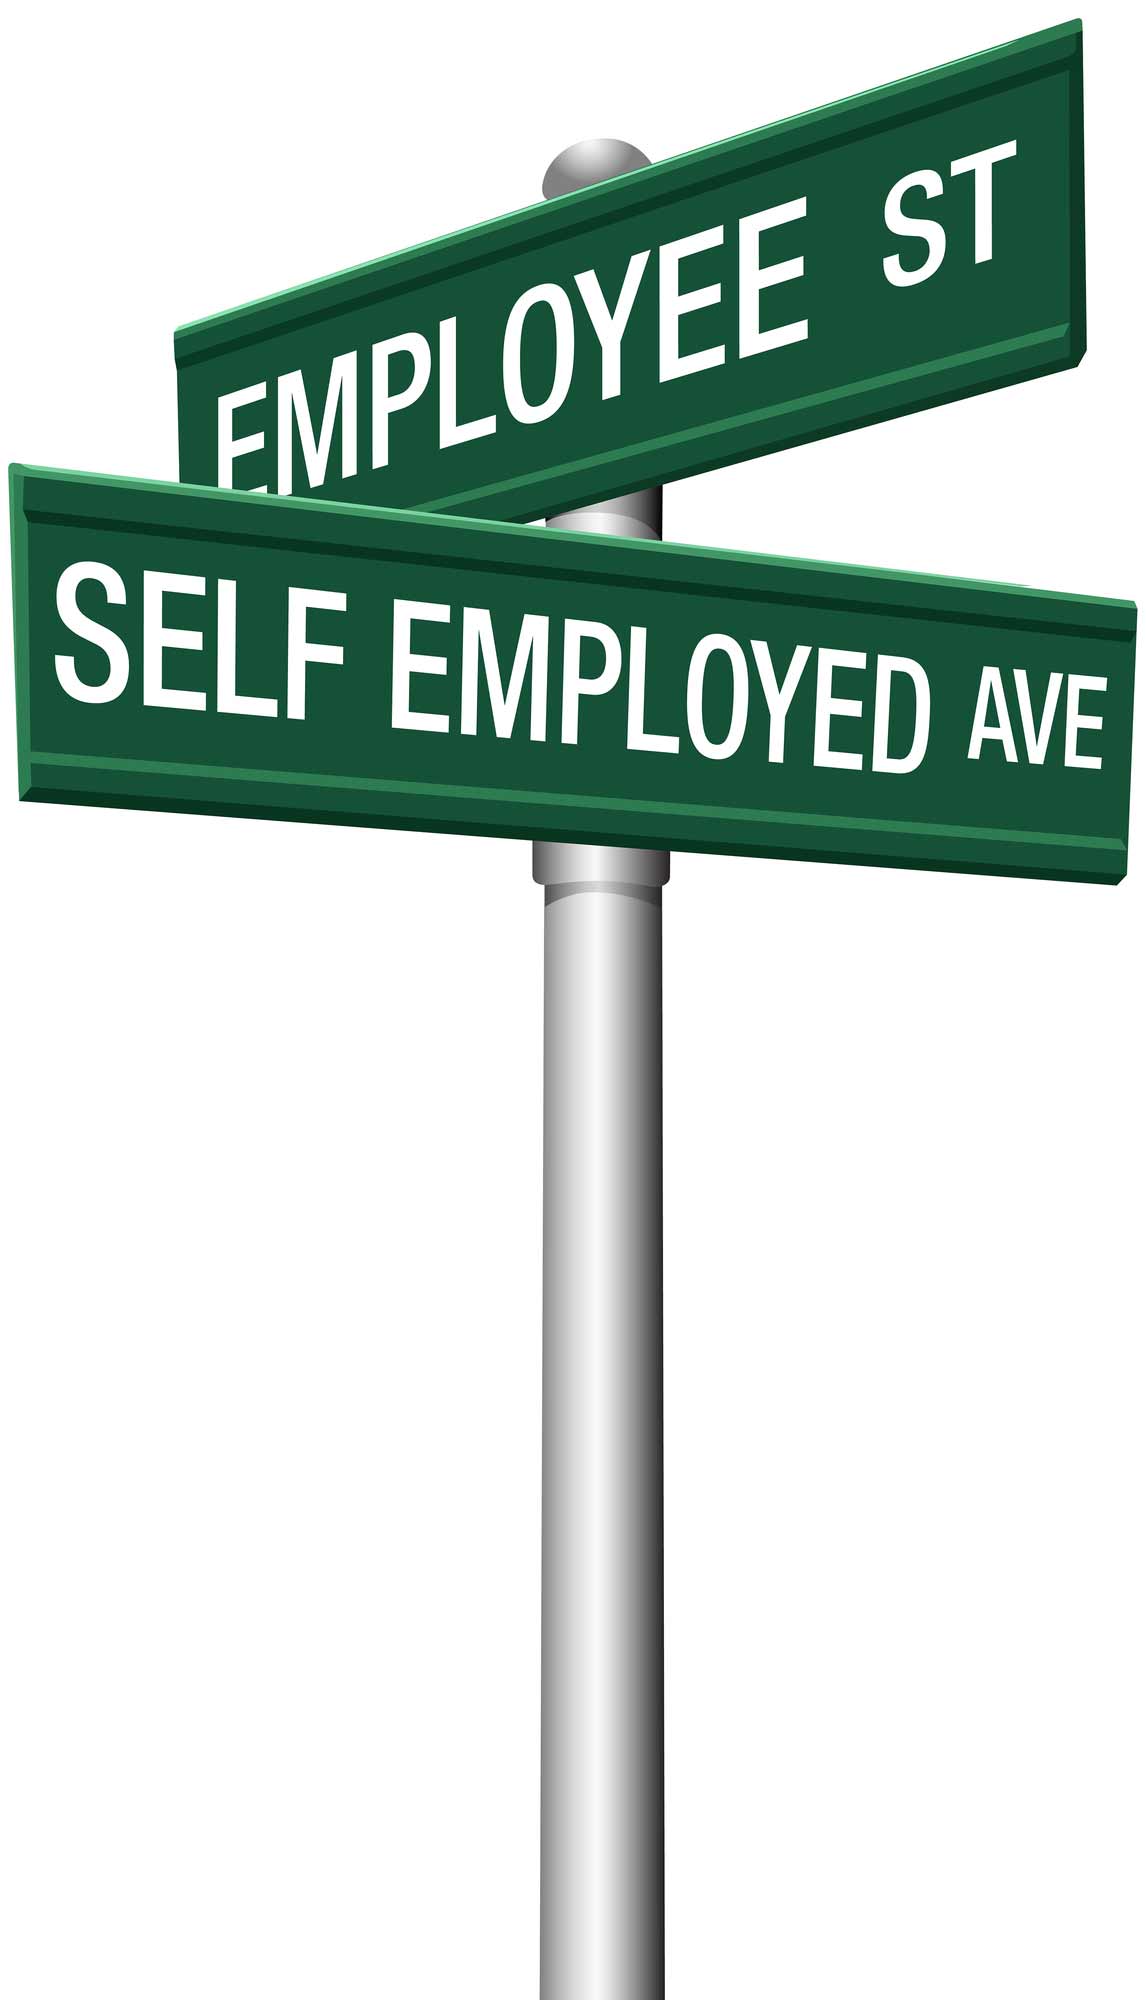 A street sign indicating cross streets where the street names that go in cross directions are Self Employed Avenue and Employee Street